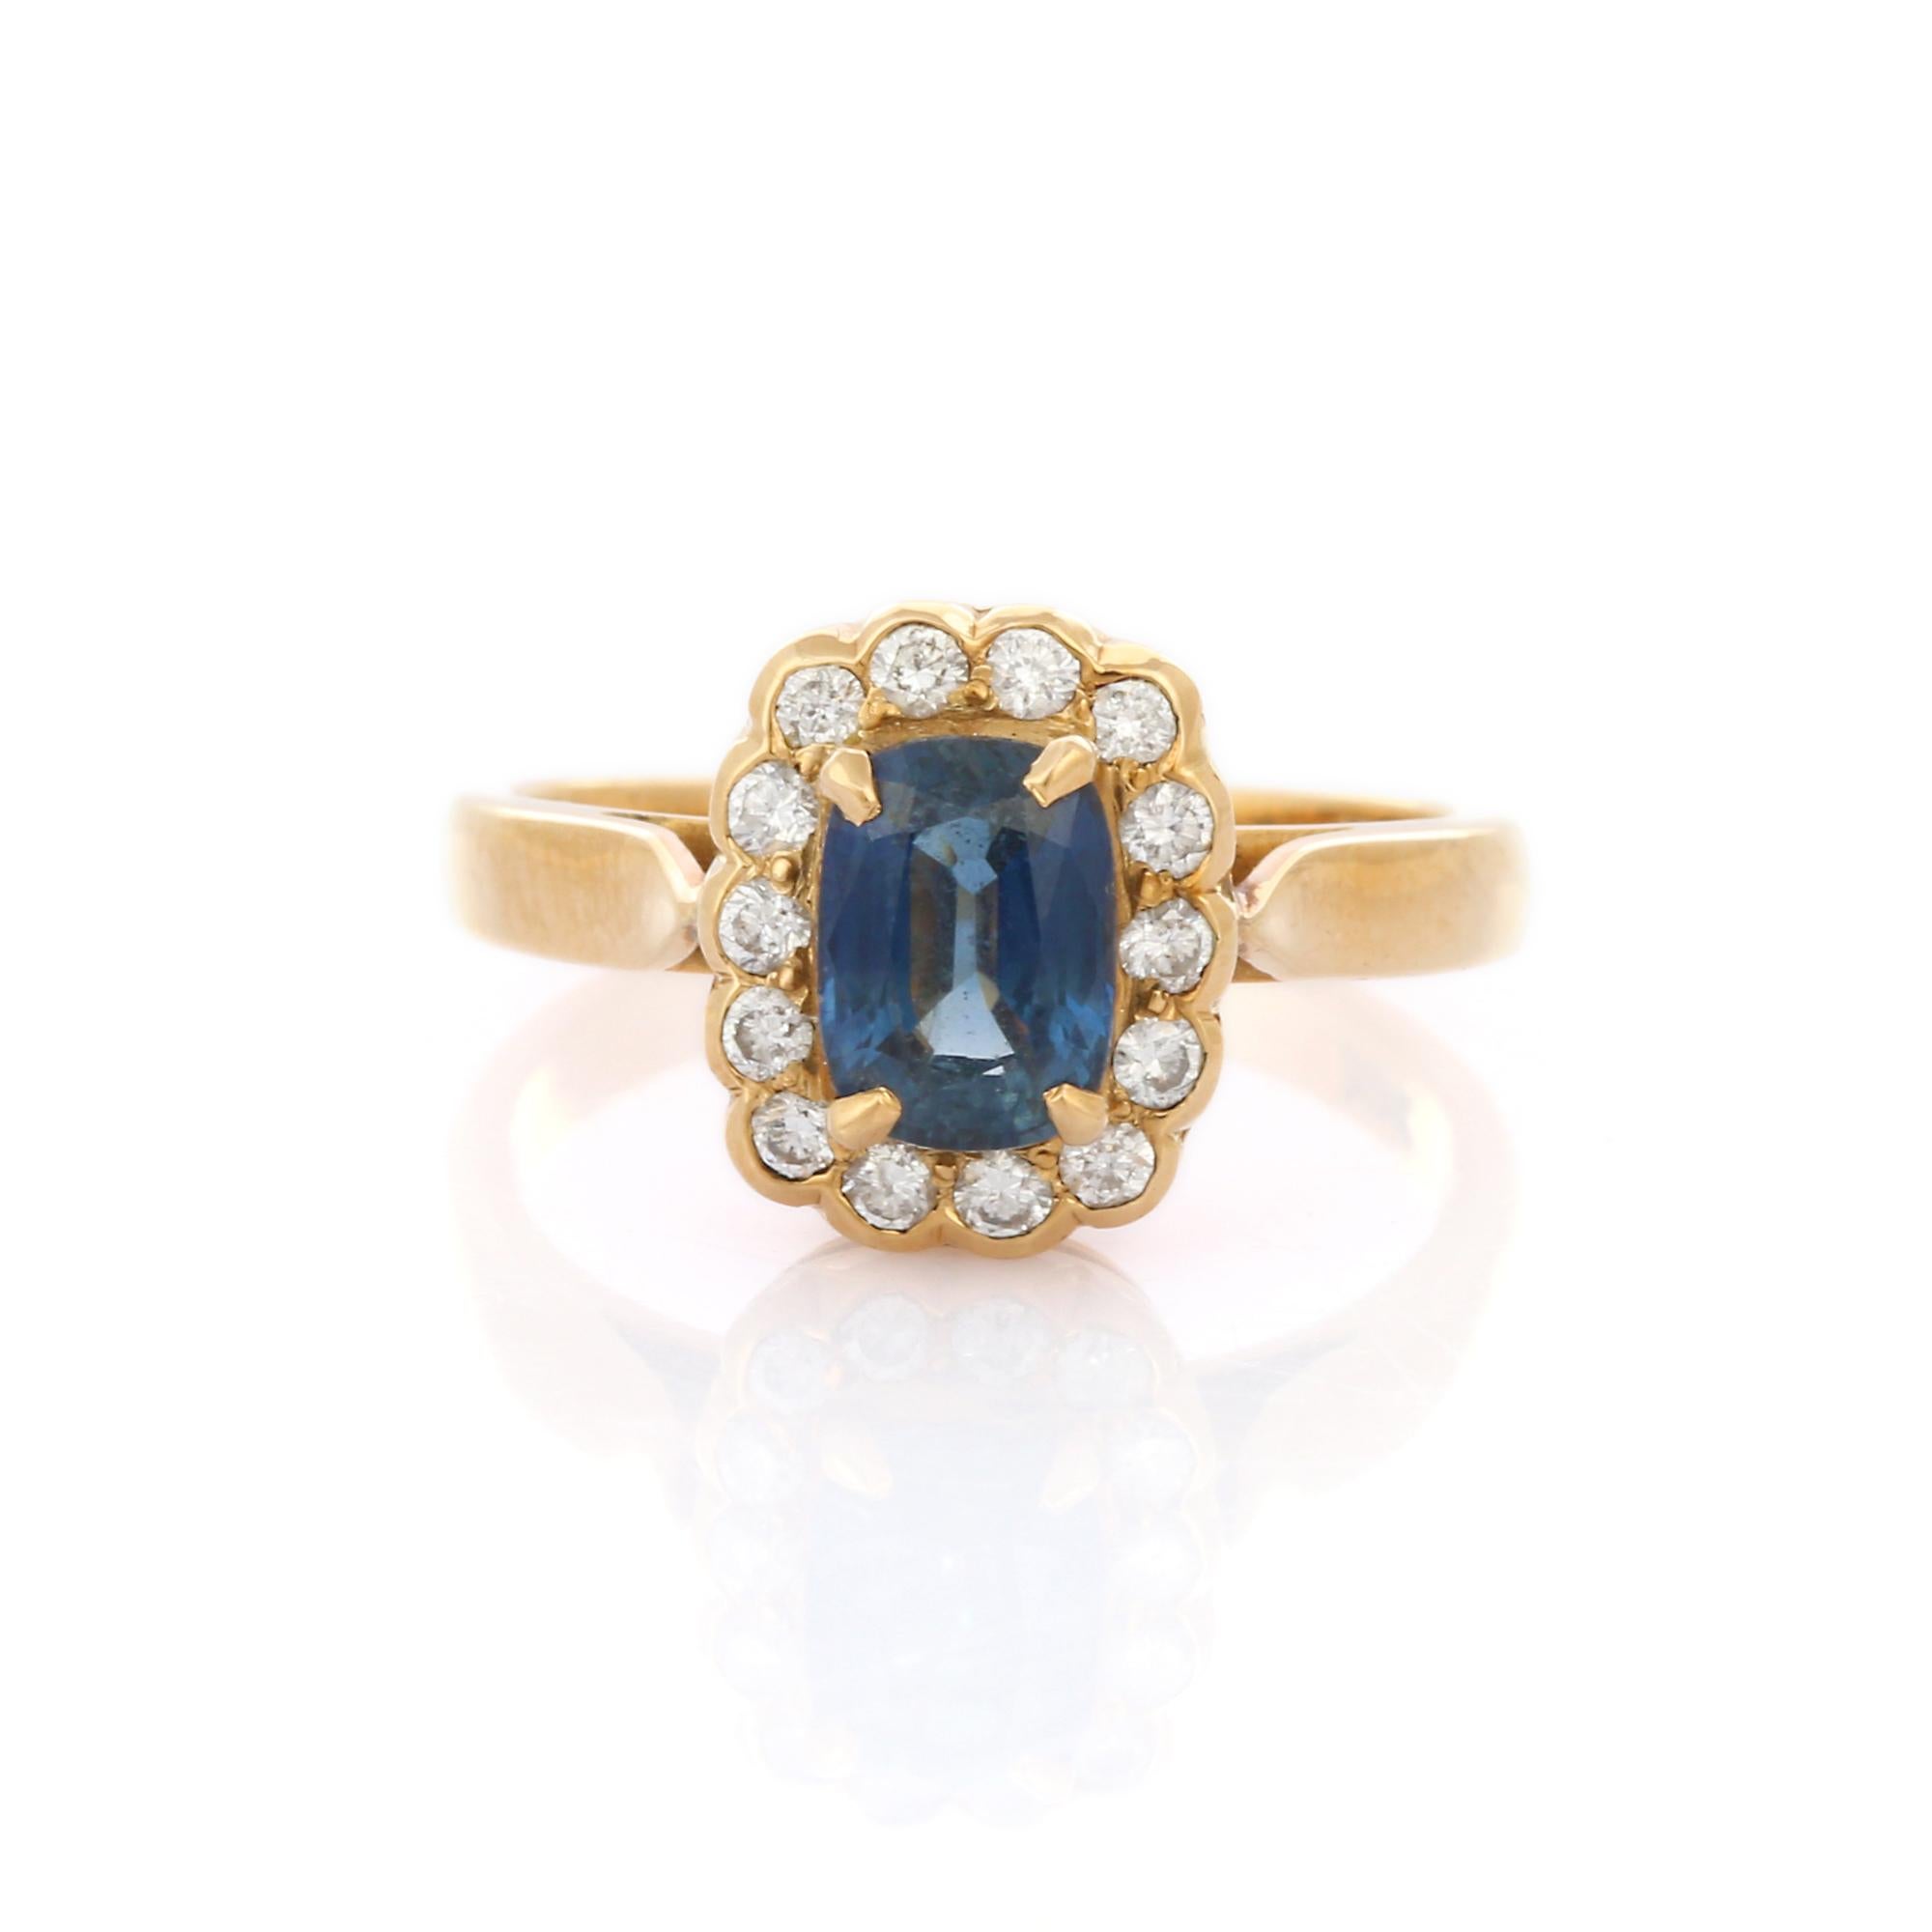 For Sale:  18K Yellow Gold Blue Sapphire Diamond Halo Ring Engagement Ring, Gift for Her 2